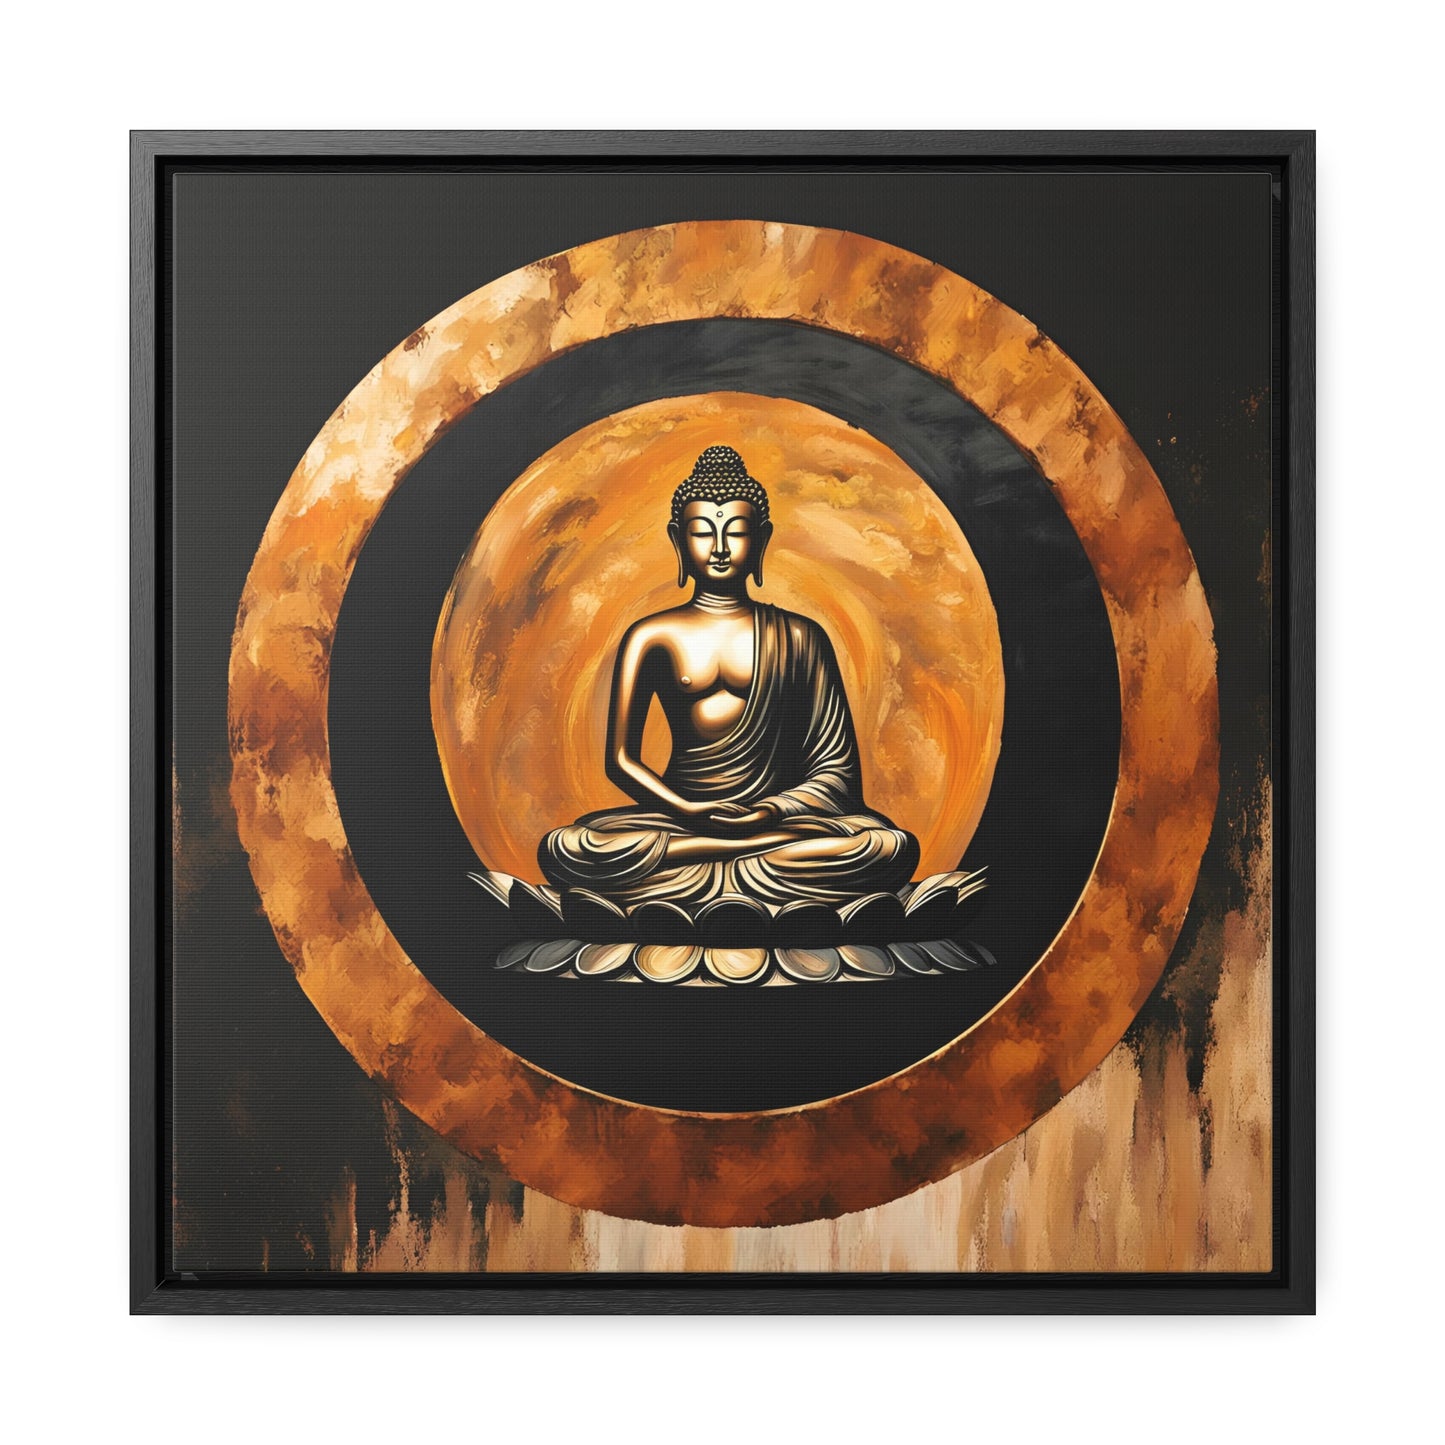 Golden Sitting Buddha in a Gold Enso Circle Print on Canvas in a Floating Frame - Spiritual and Meditation Wall Decor